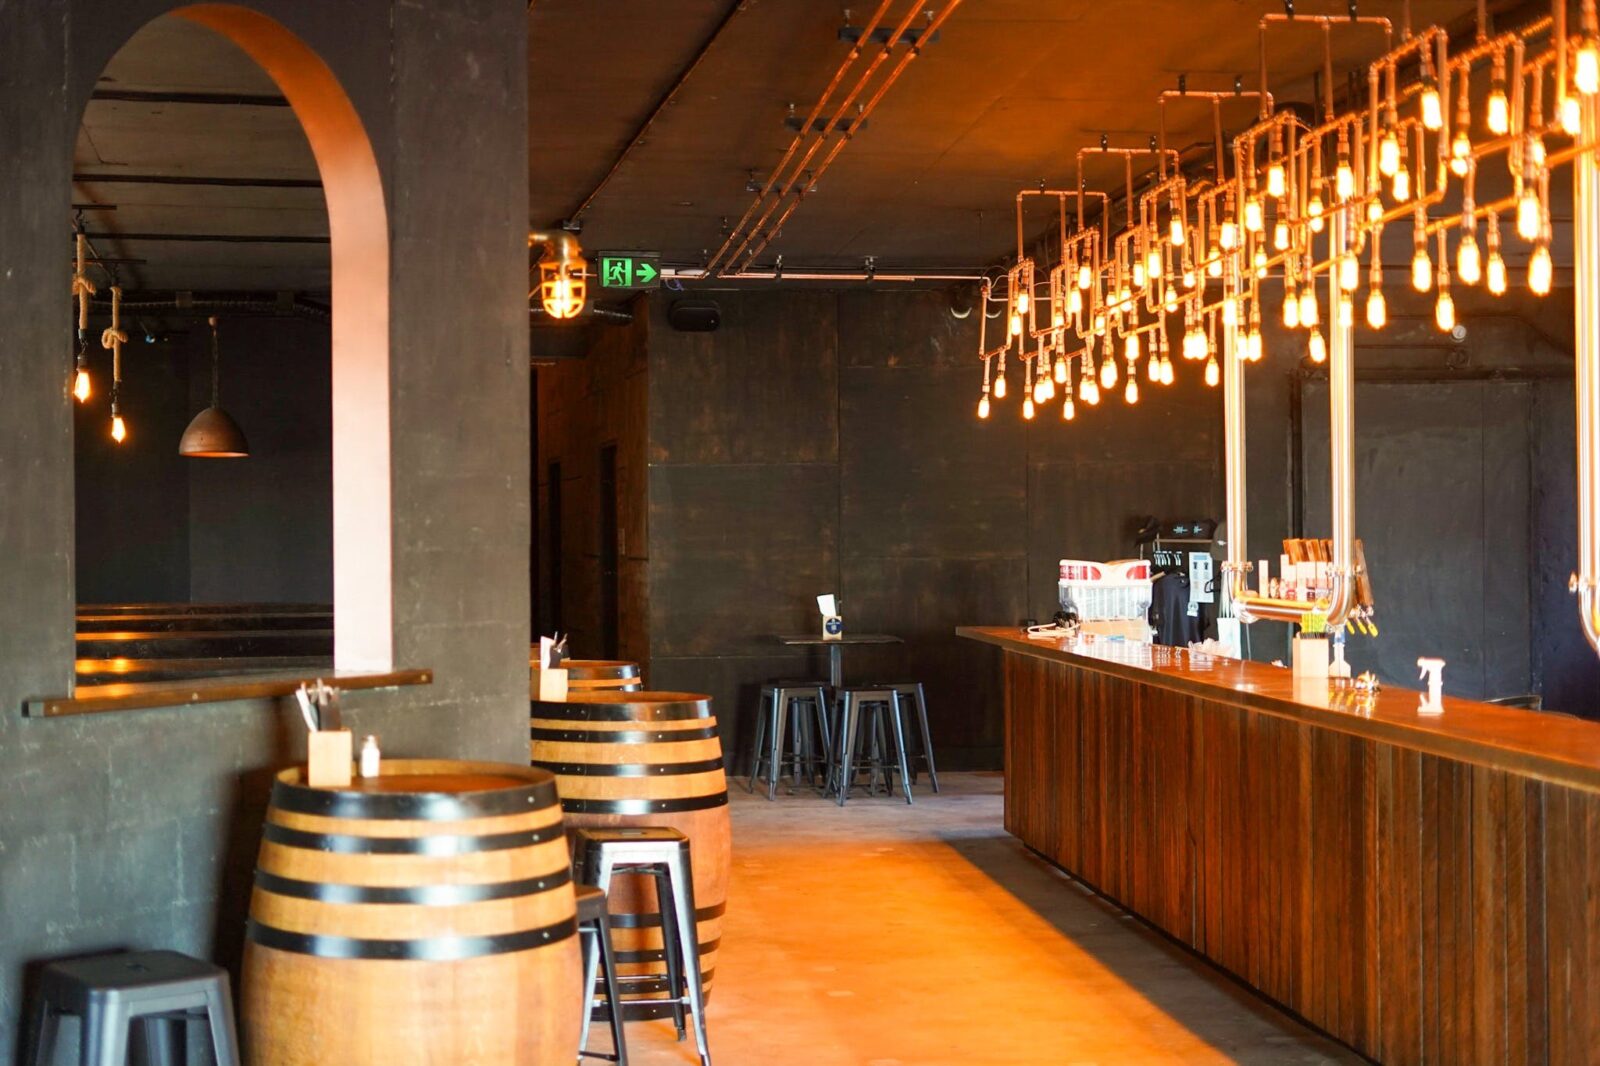 Copper lights above a copper and timber long bar. Wine barrels and seats in front of archways